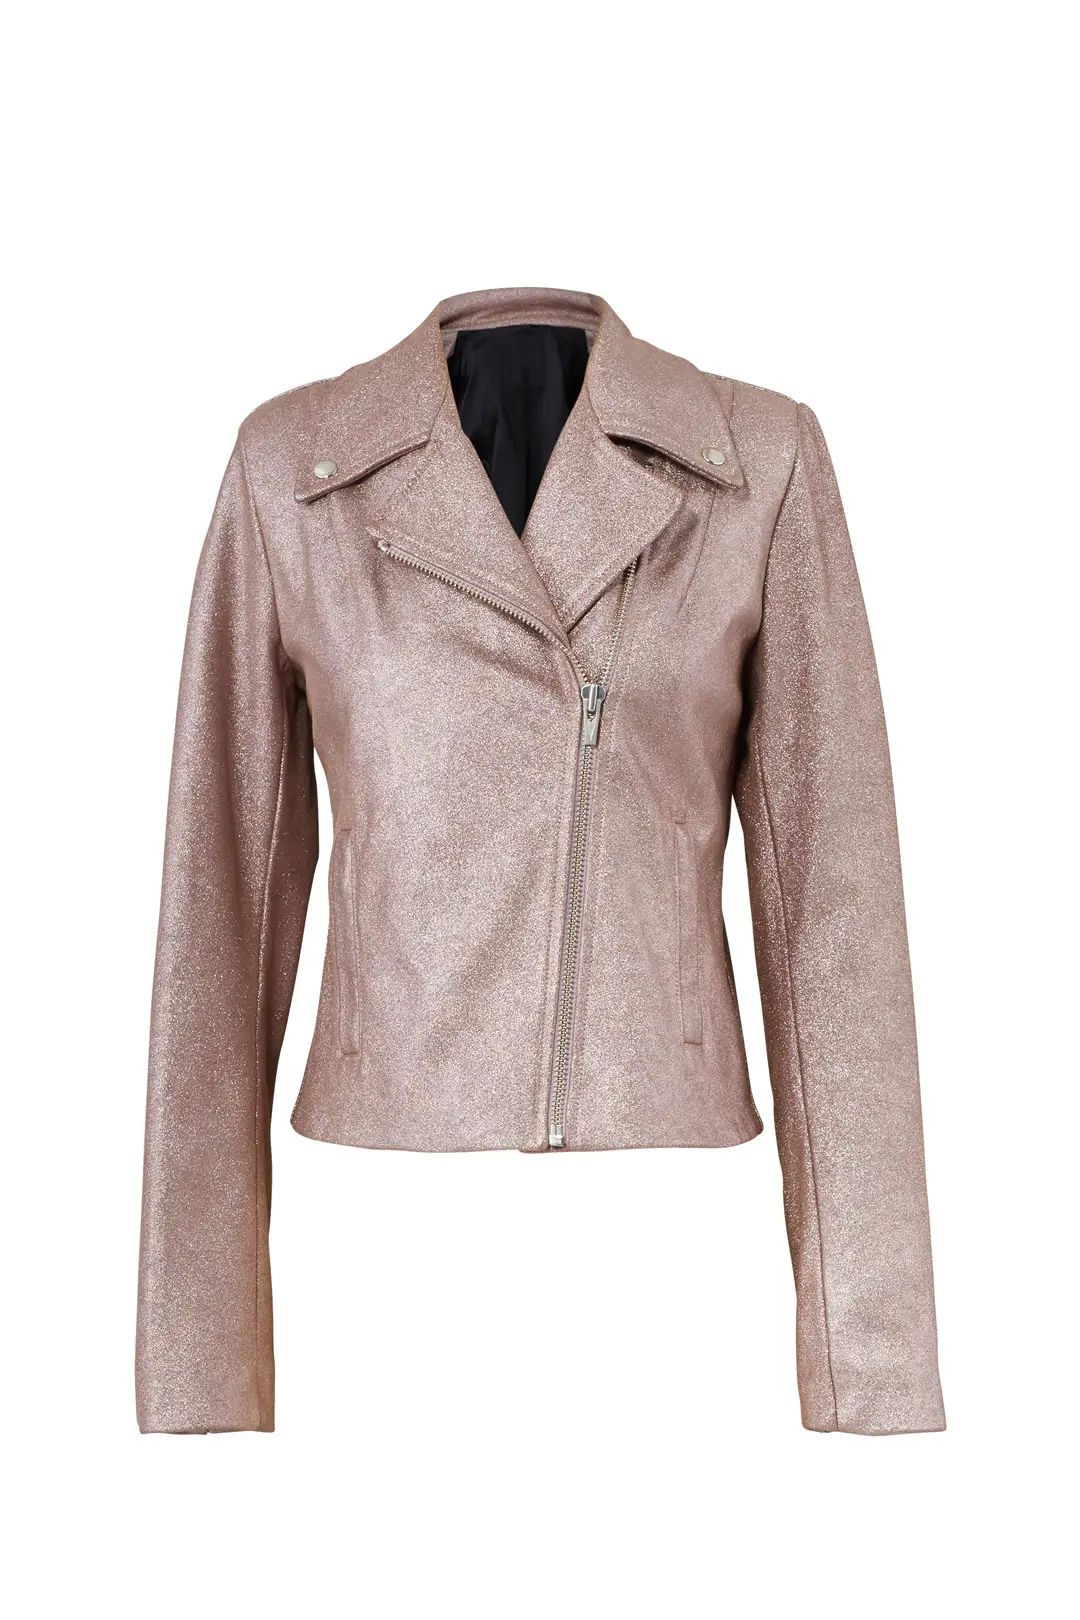 VEDA Glitter Leather Jacket | Rent The Runway